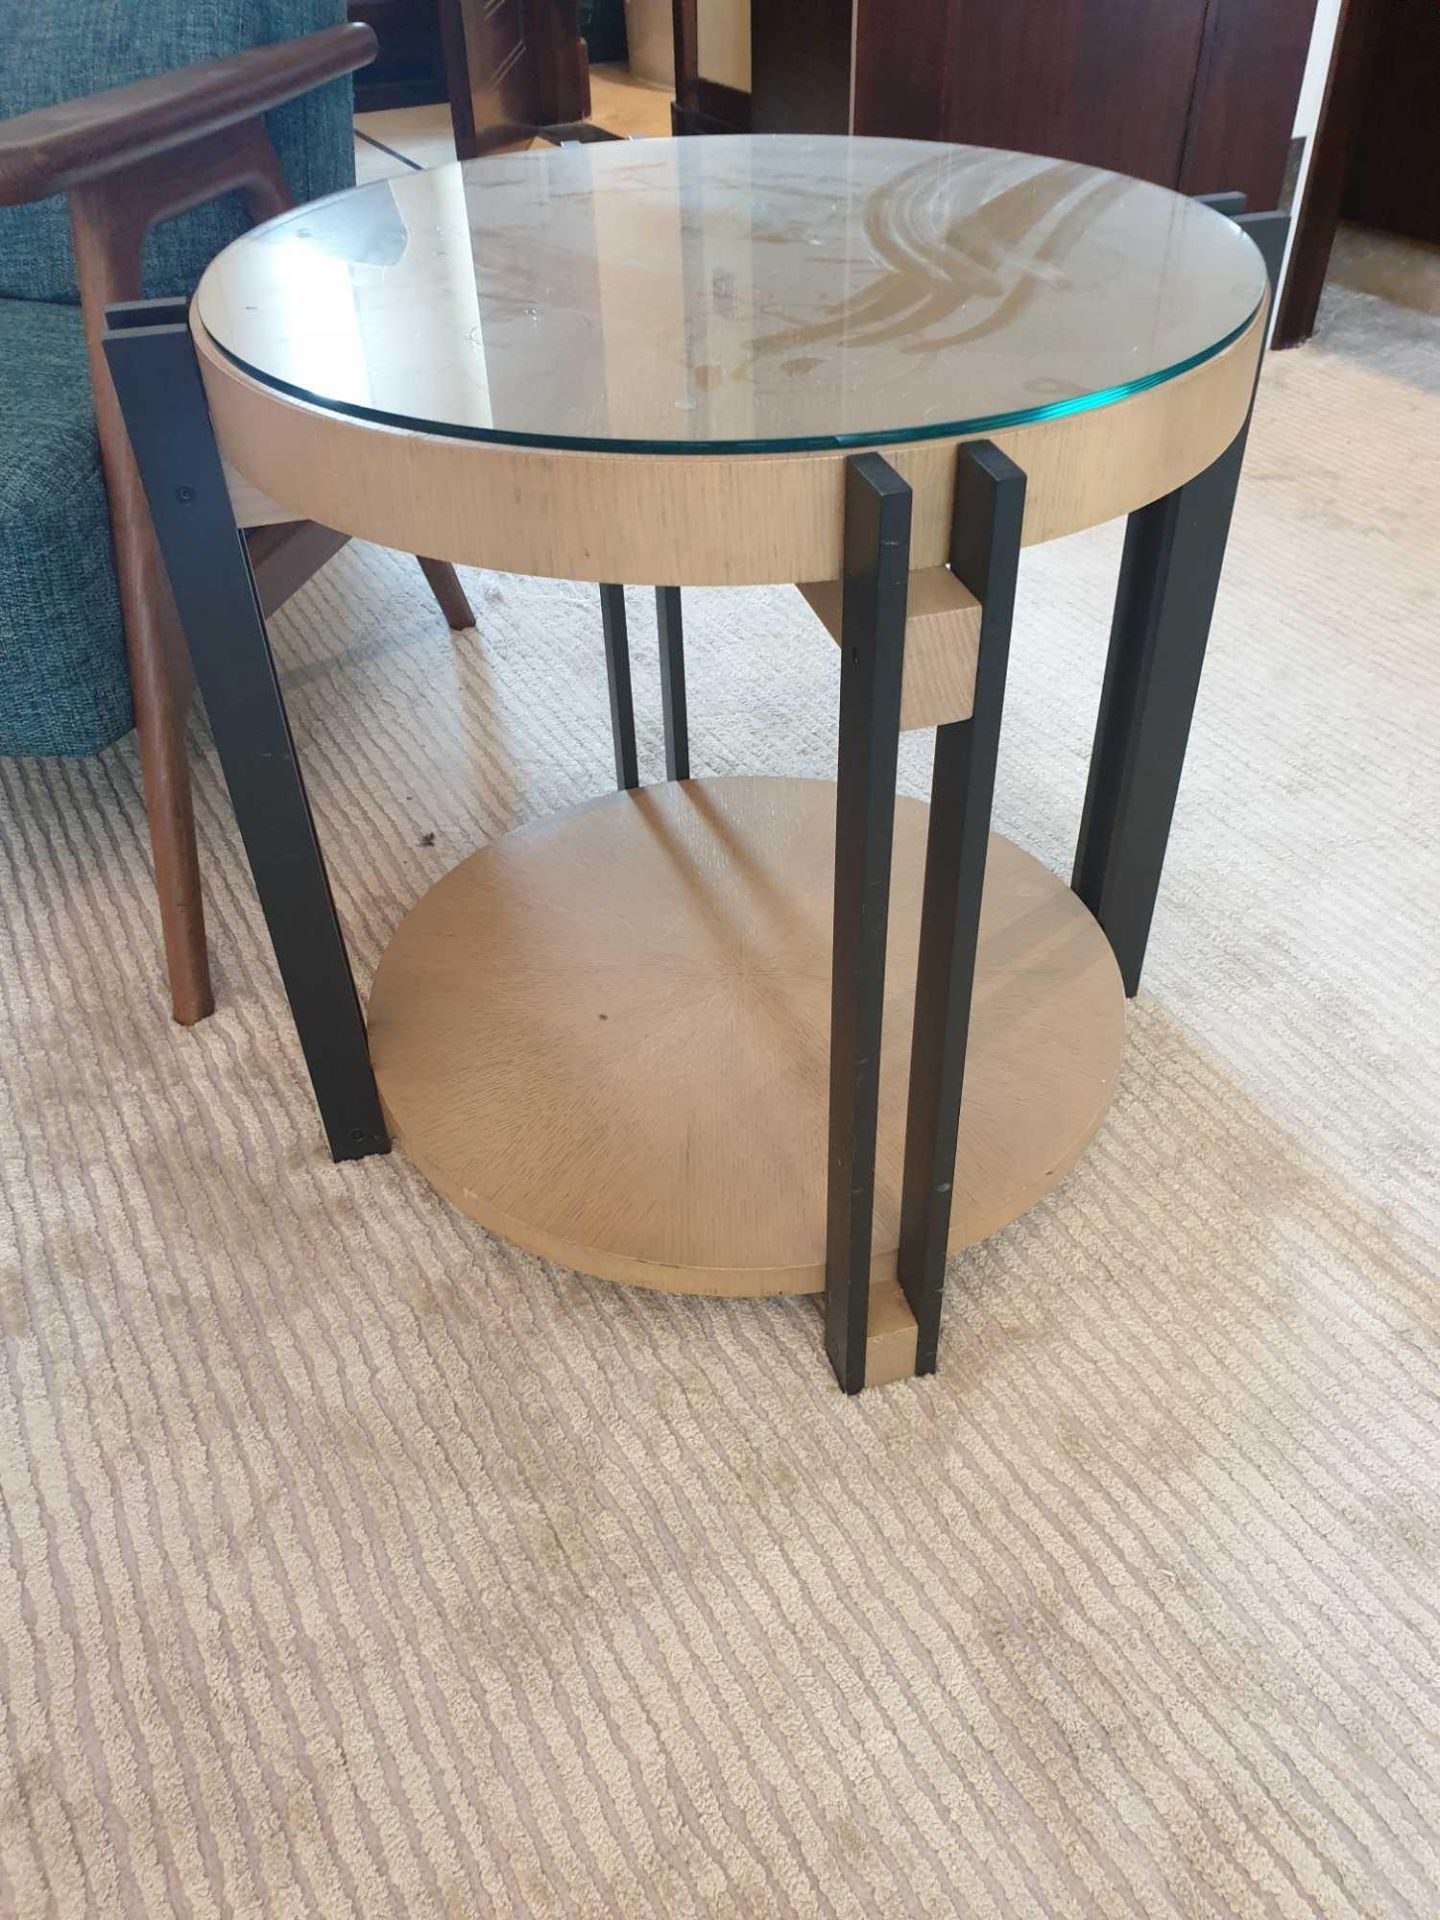 A Contemporary Side Table With Glass Top 61 x 57cm - Image 6 of 6